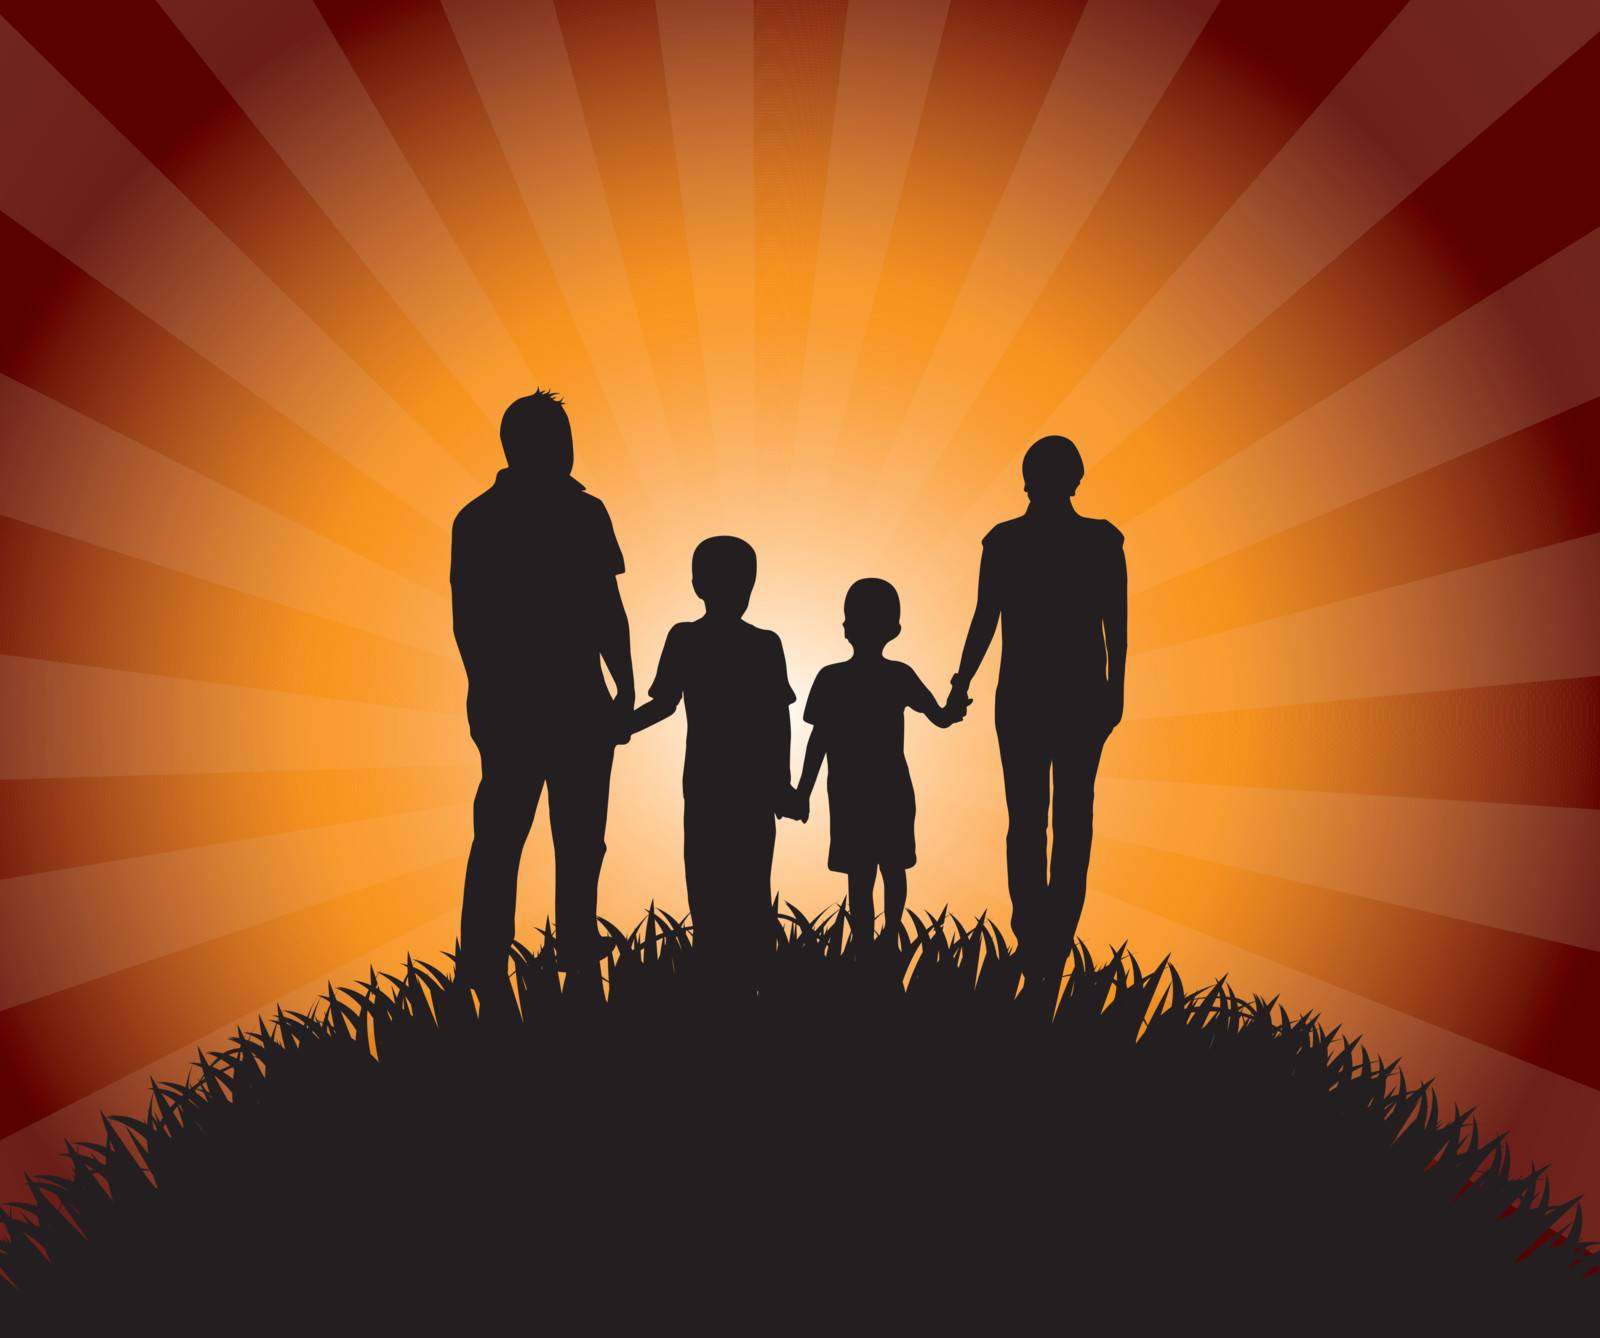 Silhouettes of family over late afternoon background vector illustration